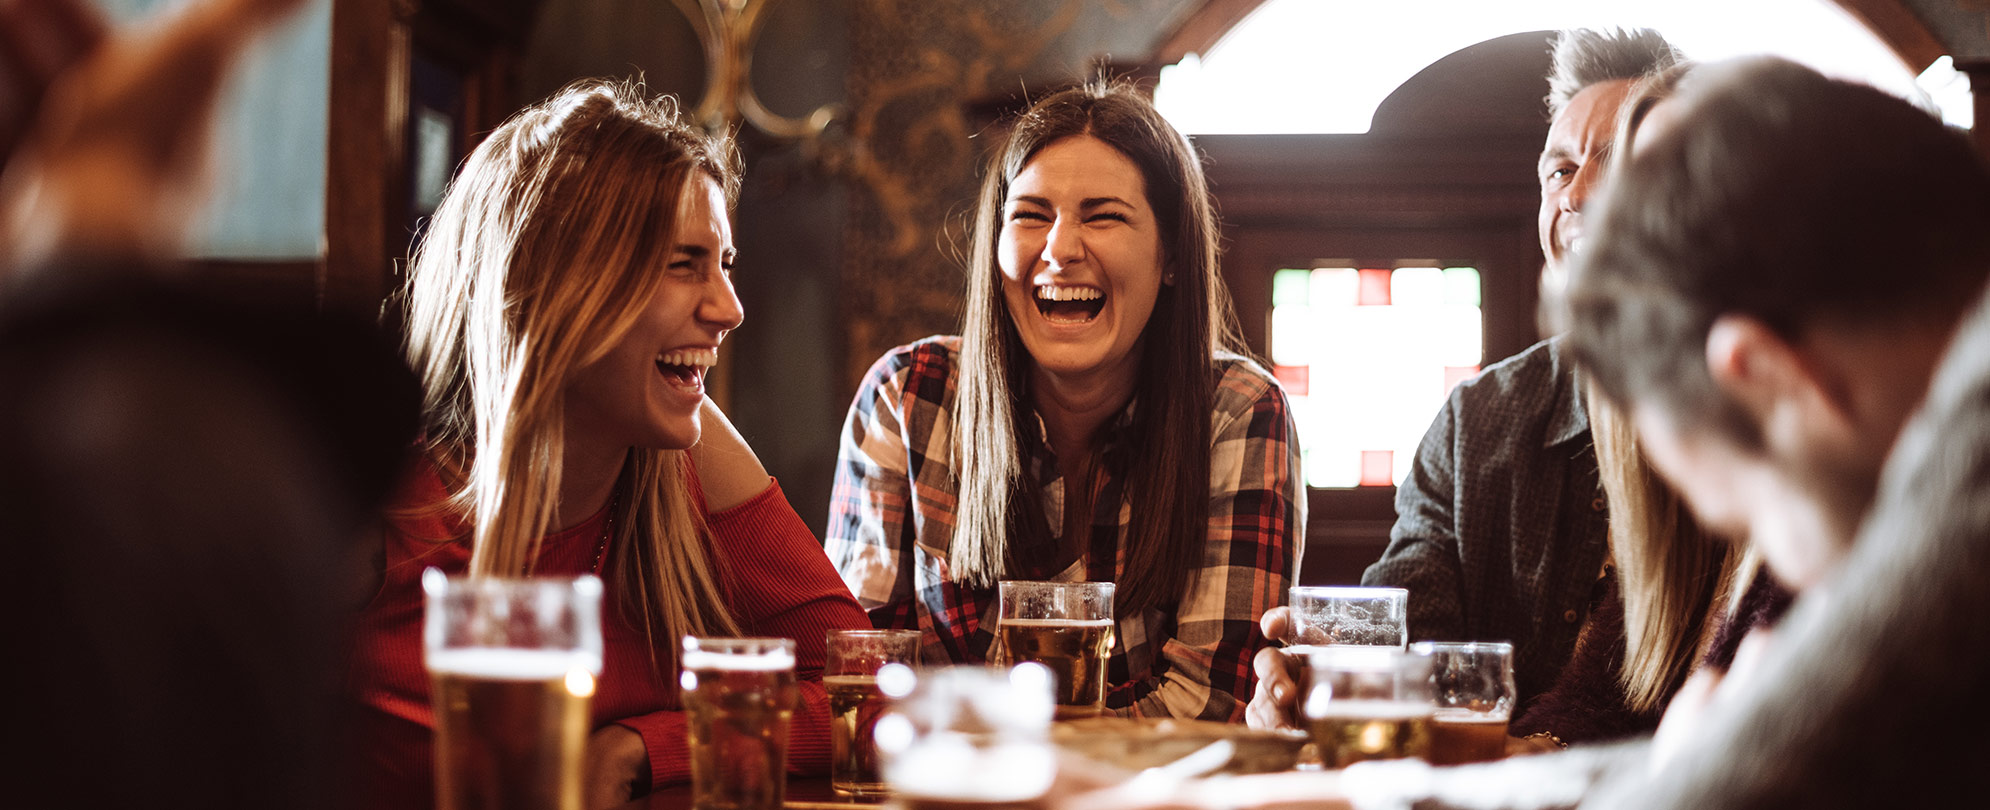 A group of friends are laughing while they drink beers, in a bar.